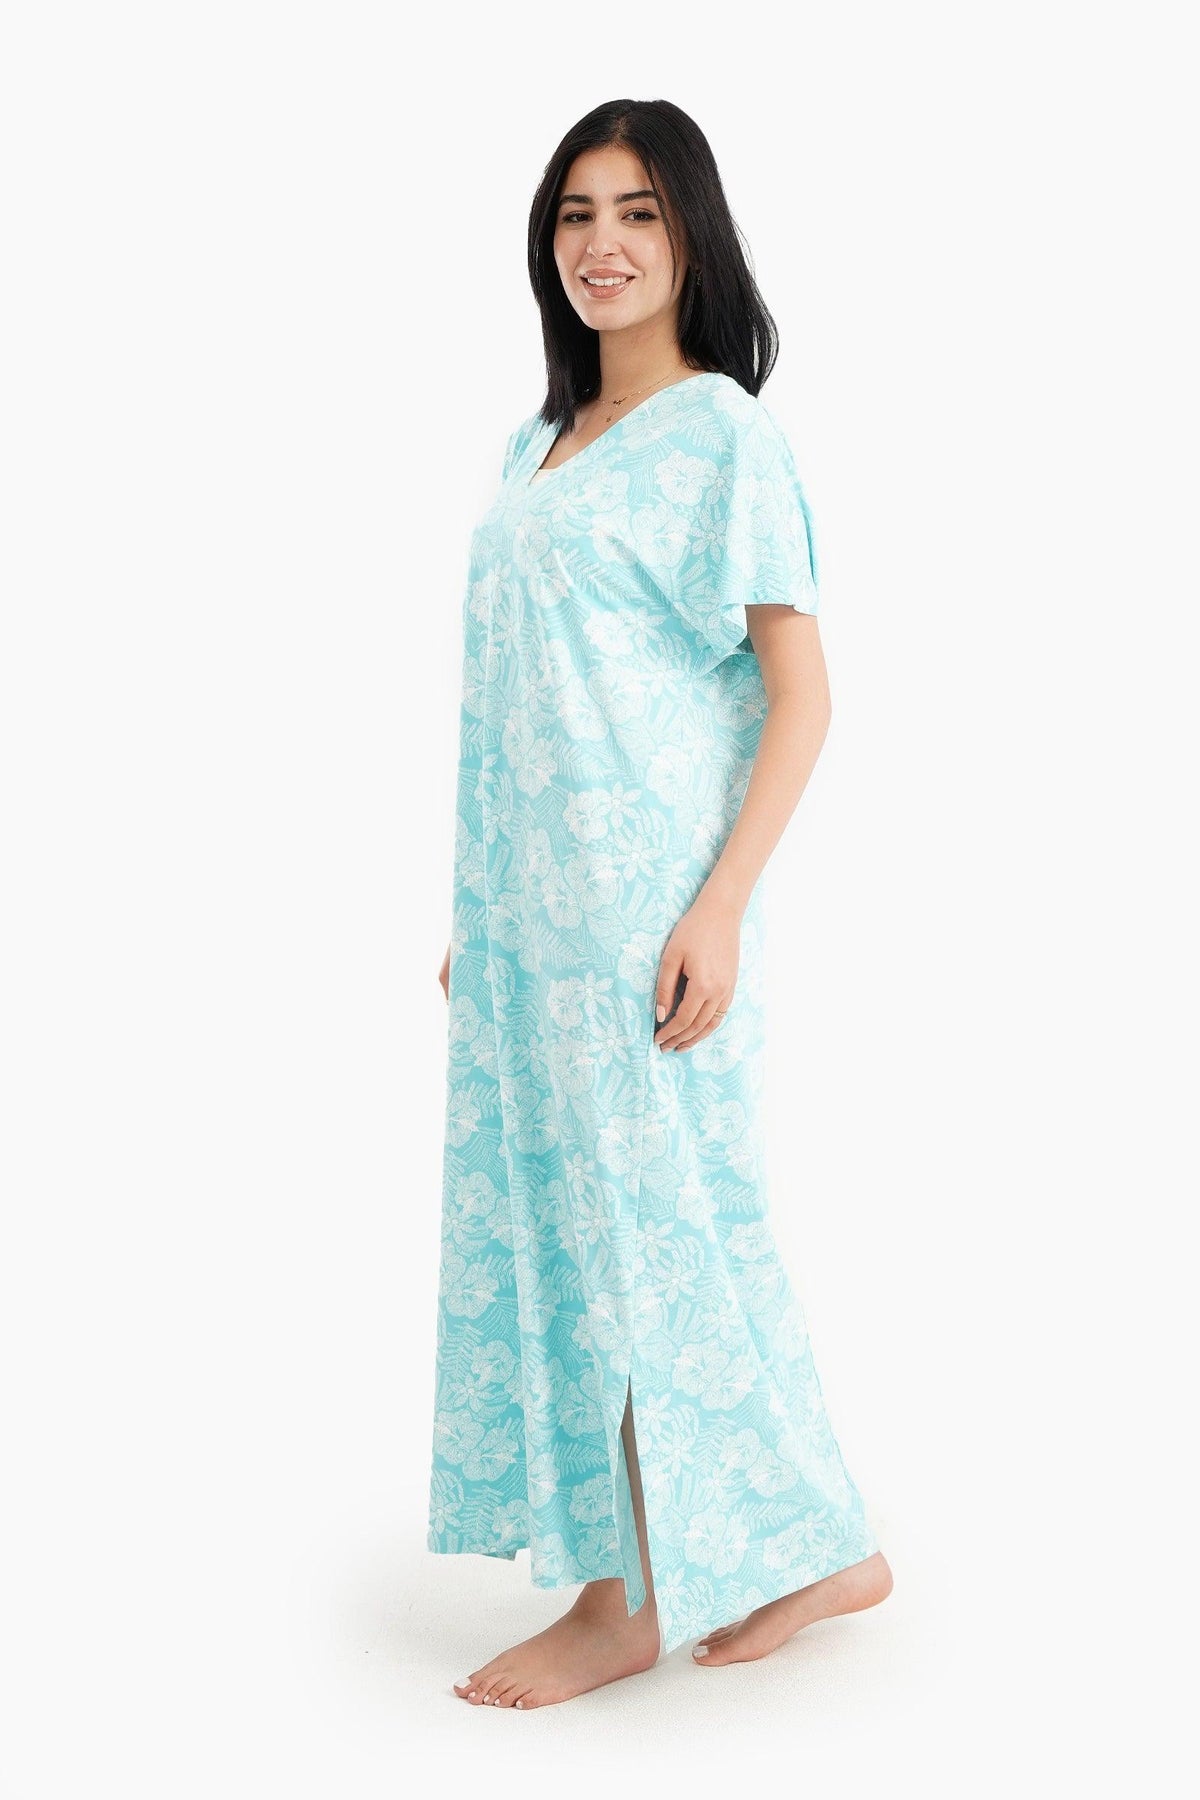 Turquoise Blue Nightgown - Carina - كارينا